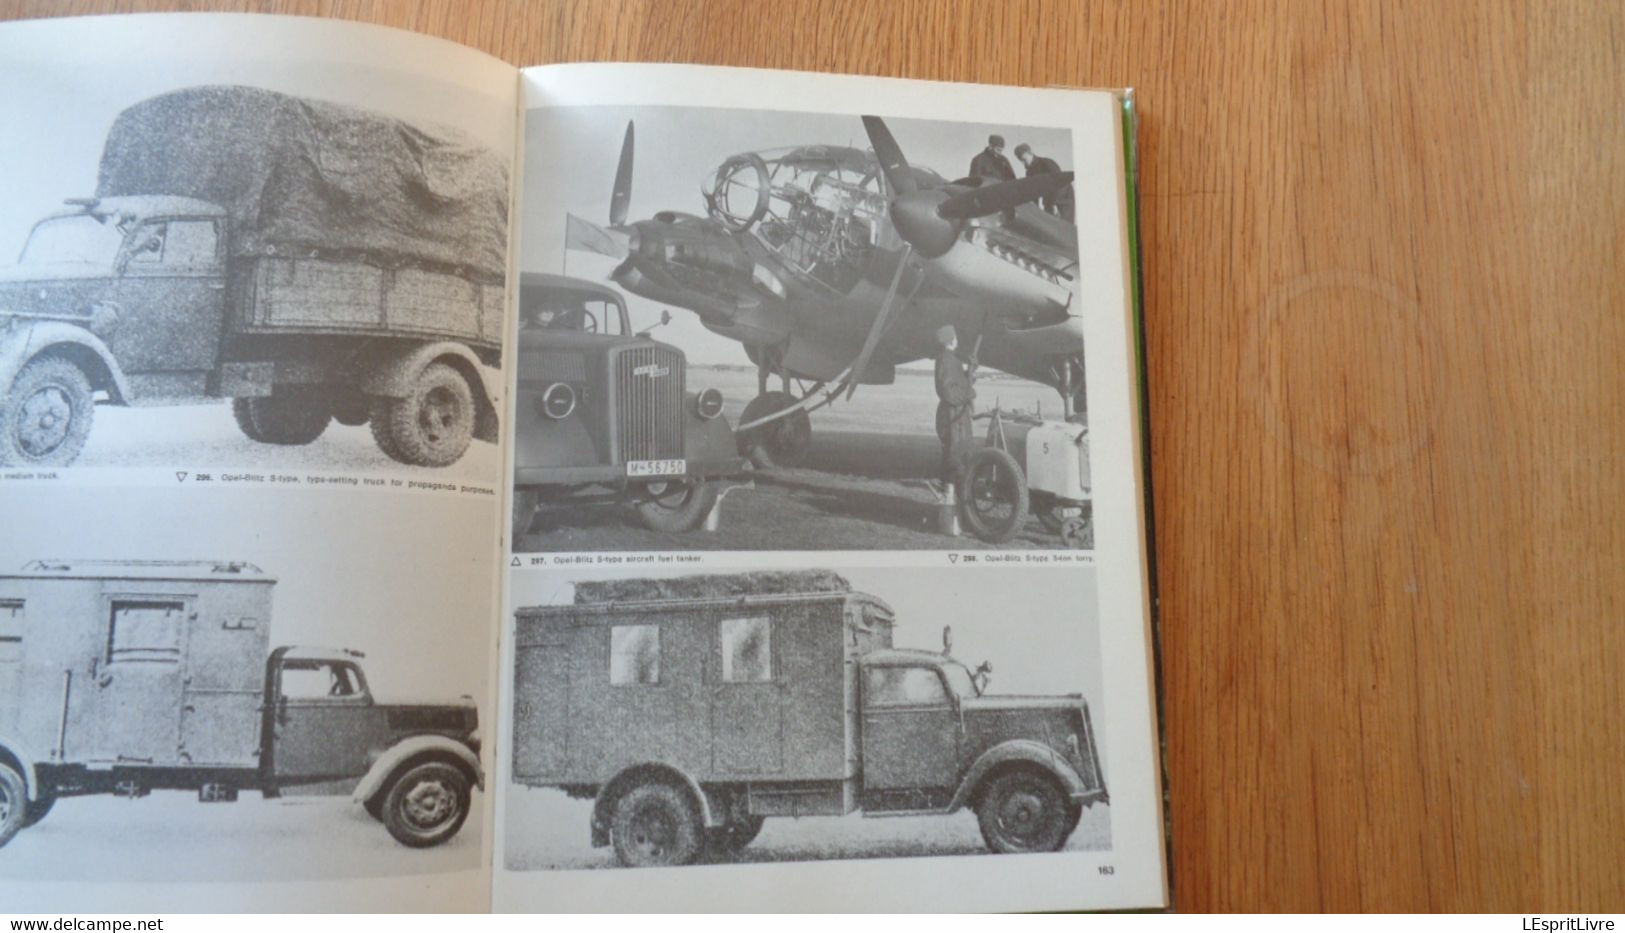 GERMAN MILITRY TRANSPORT OF WORLD WAR TWO Guerre 40 45 1940 1945 Armée Allemande Wehrmacht Lorries Cars Camions Trucks